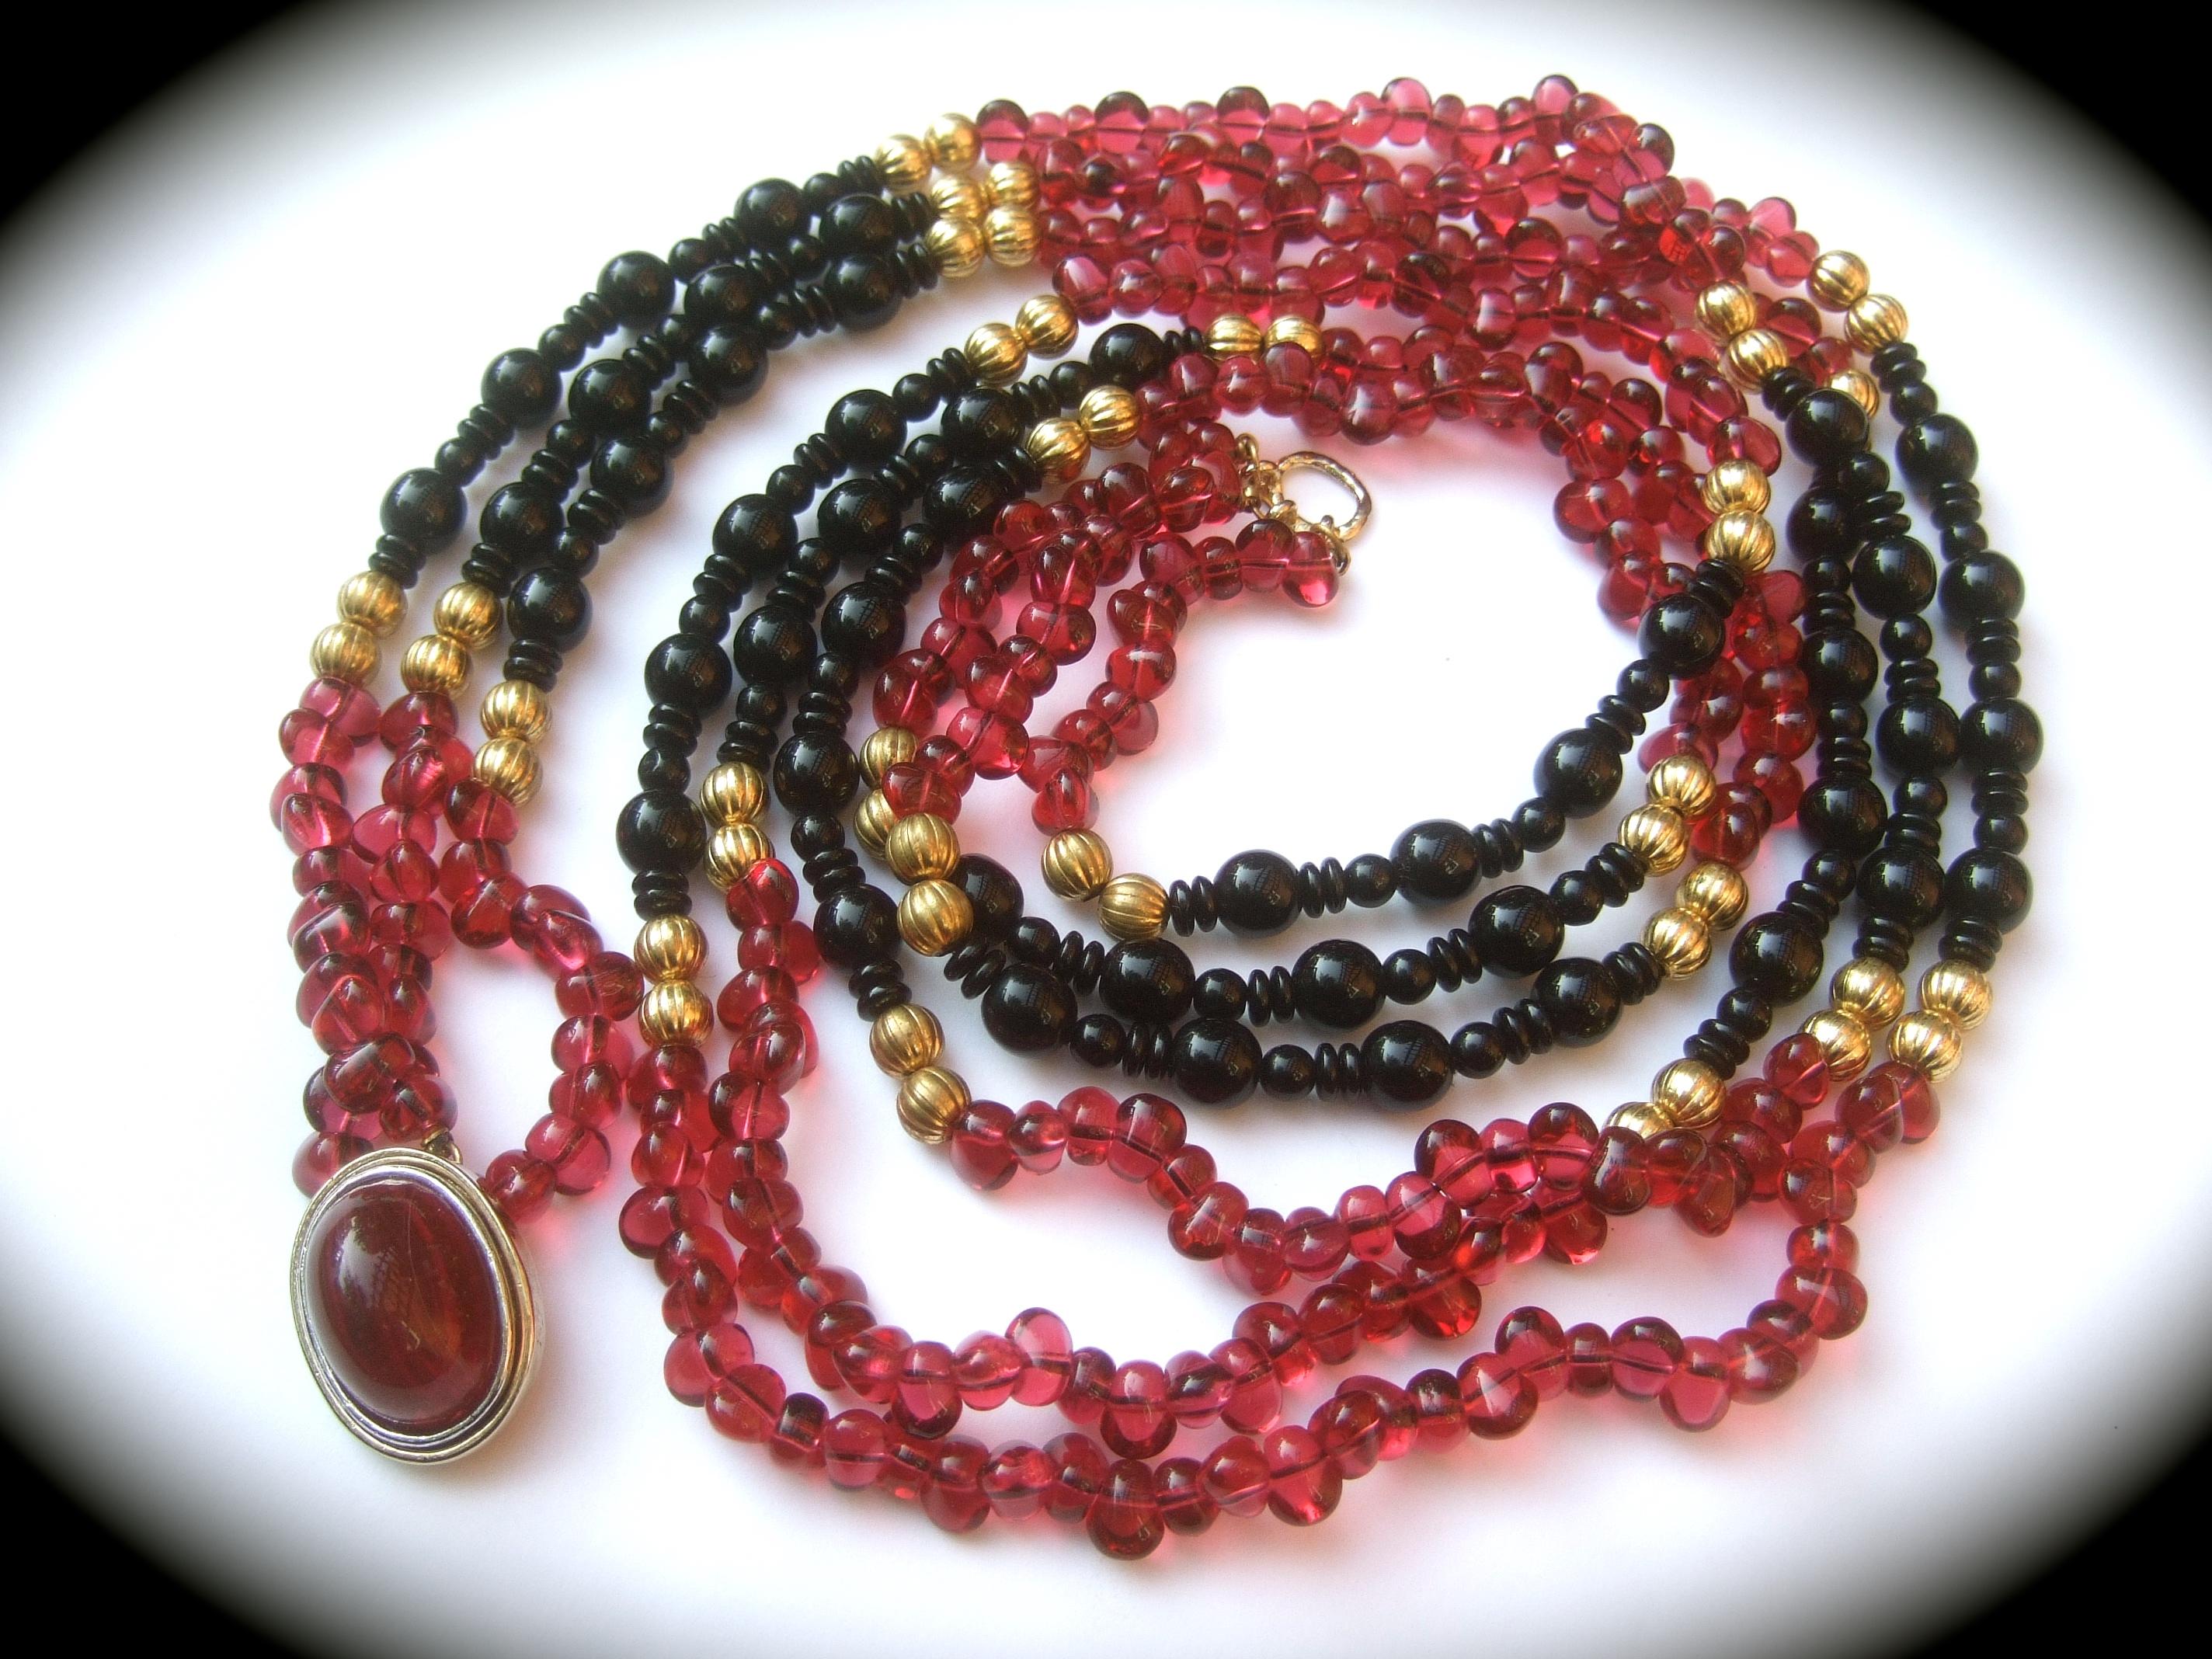 Opulent long glass beaded triple strand statement necklace c 1980s
The elegant opera length necklace is comprised of a collection deep berry color smooth oval irregular shaped translucent beads; juxtaposed with rows of jet black beads in various